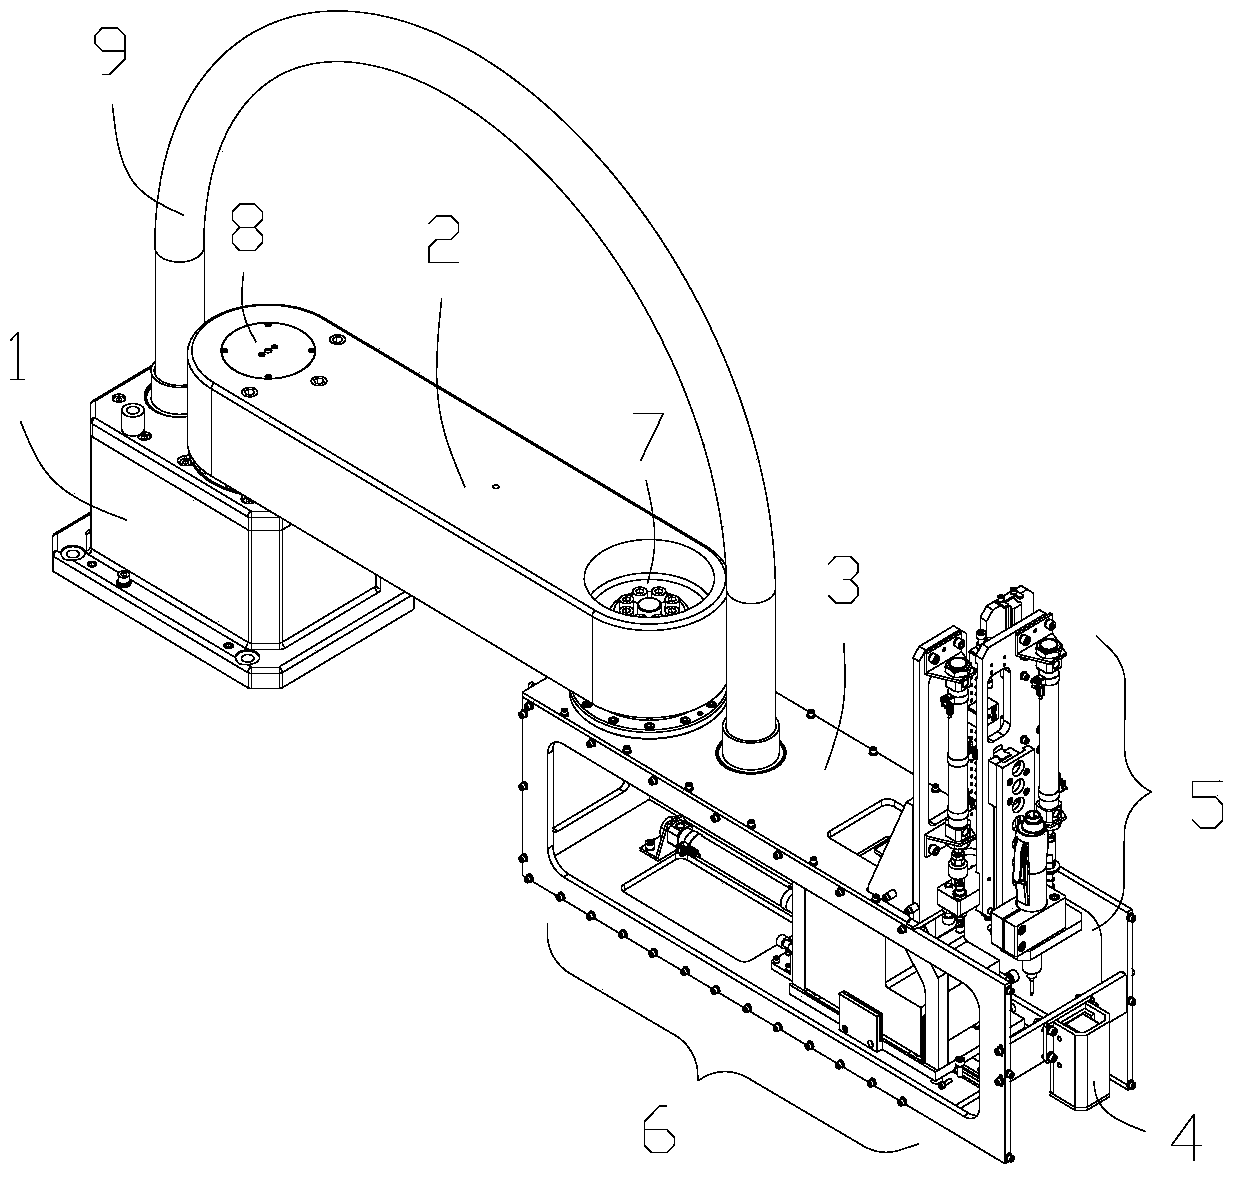 An automatic screw-tightening device